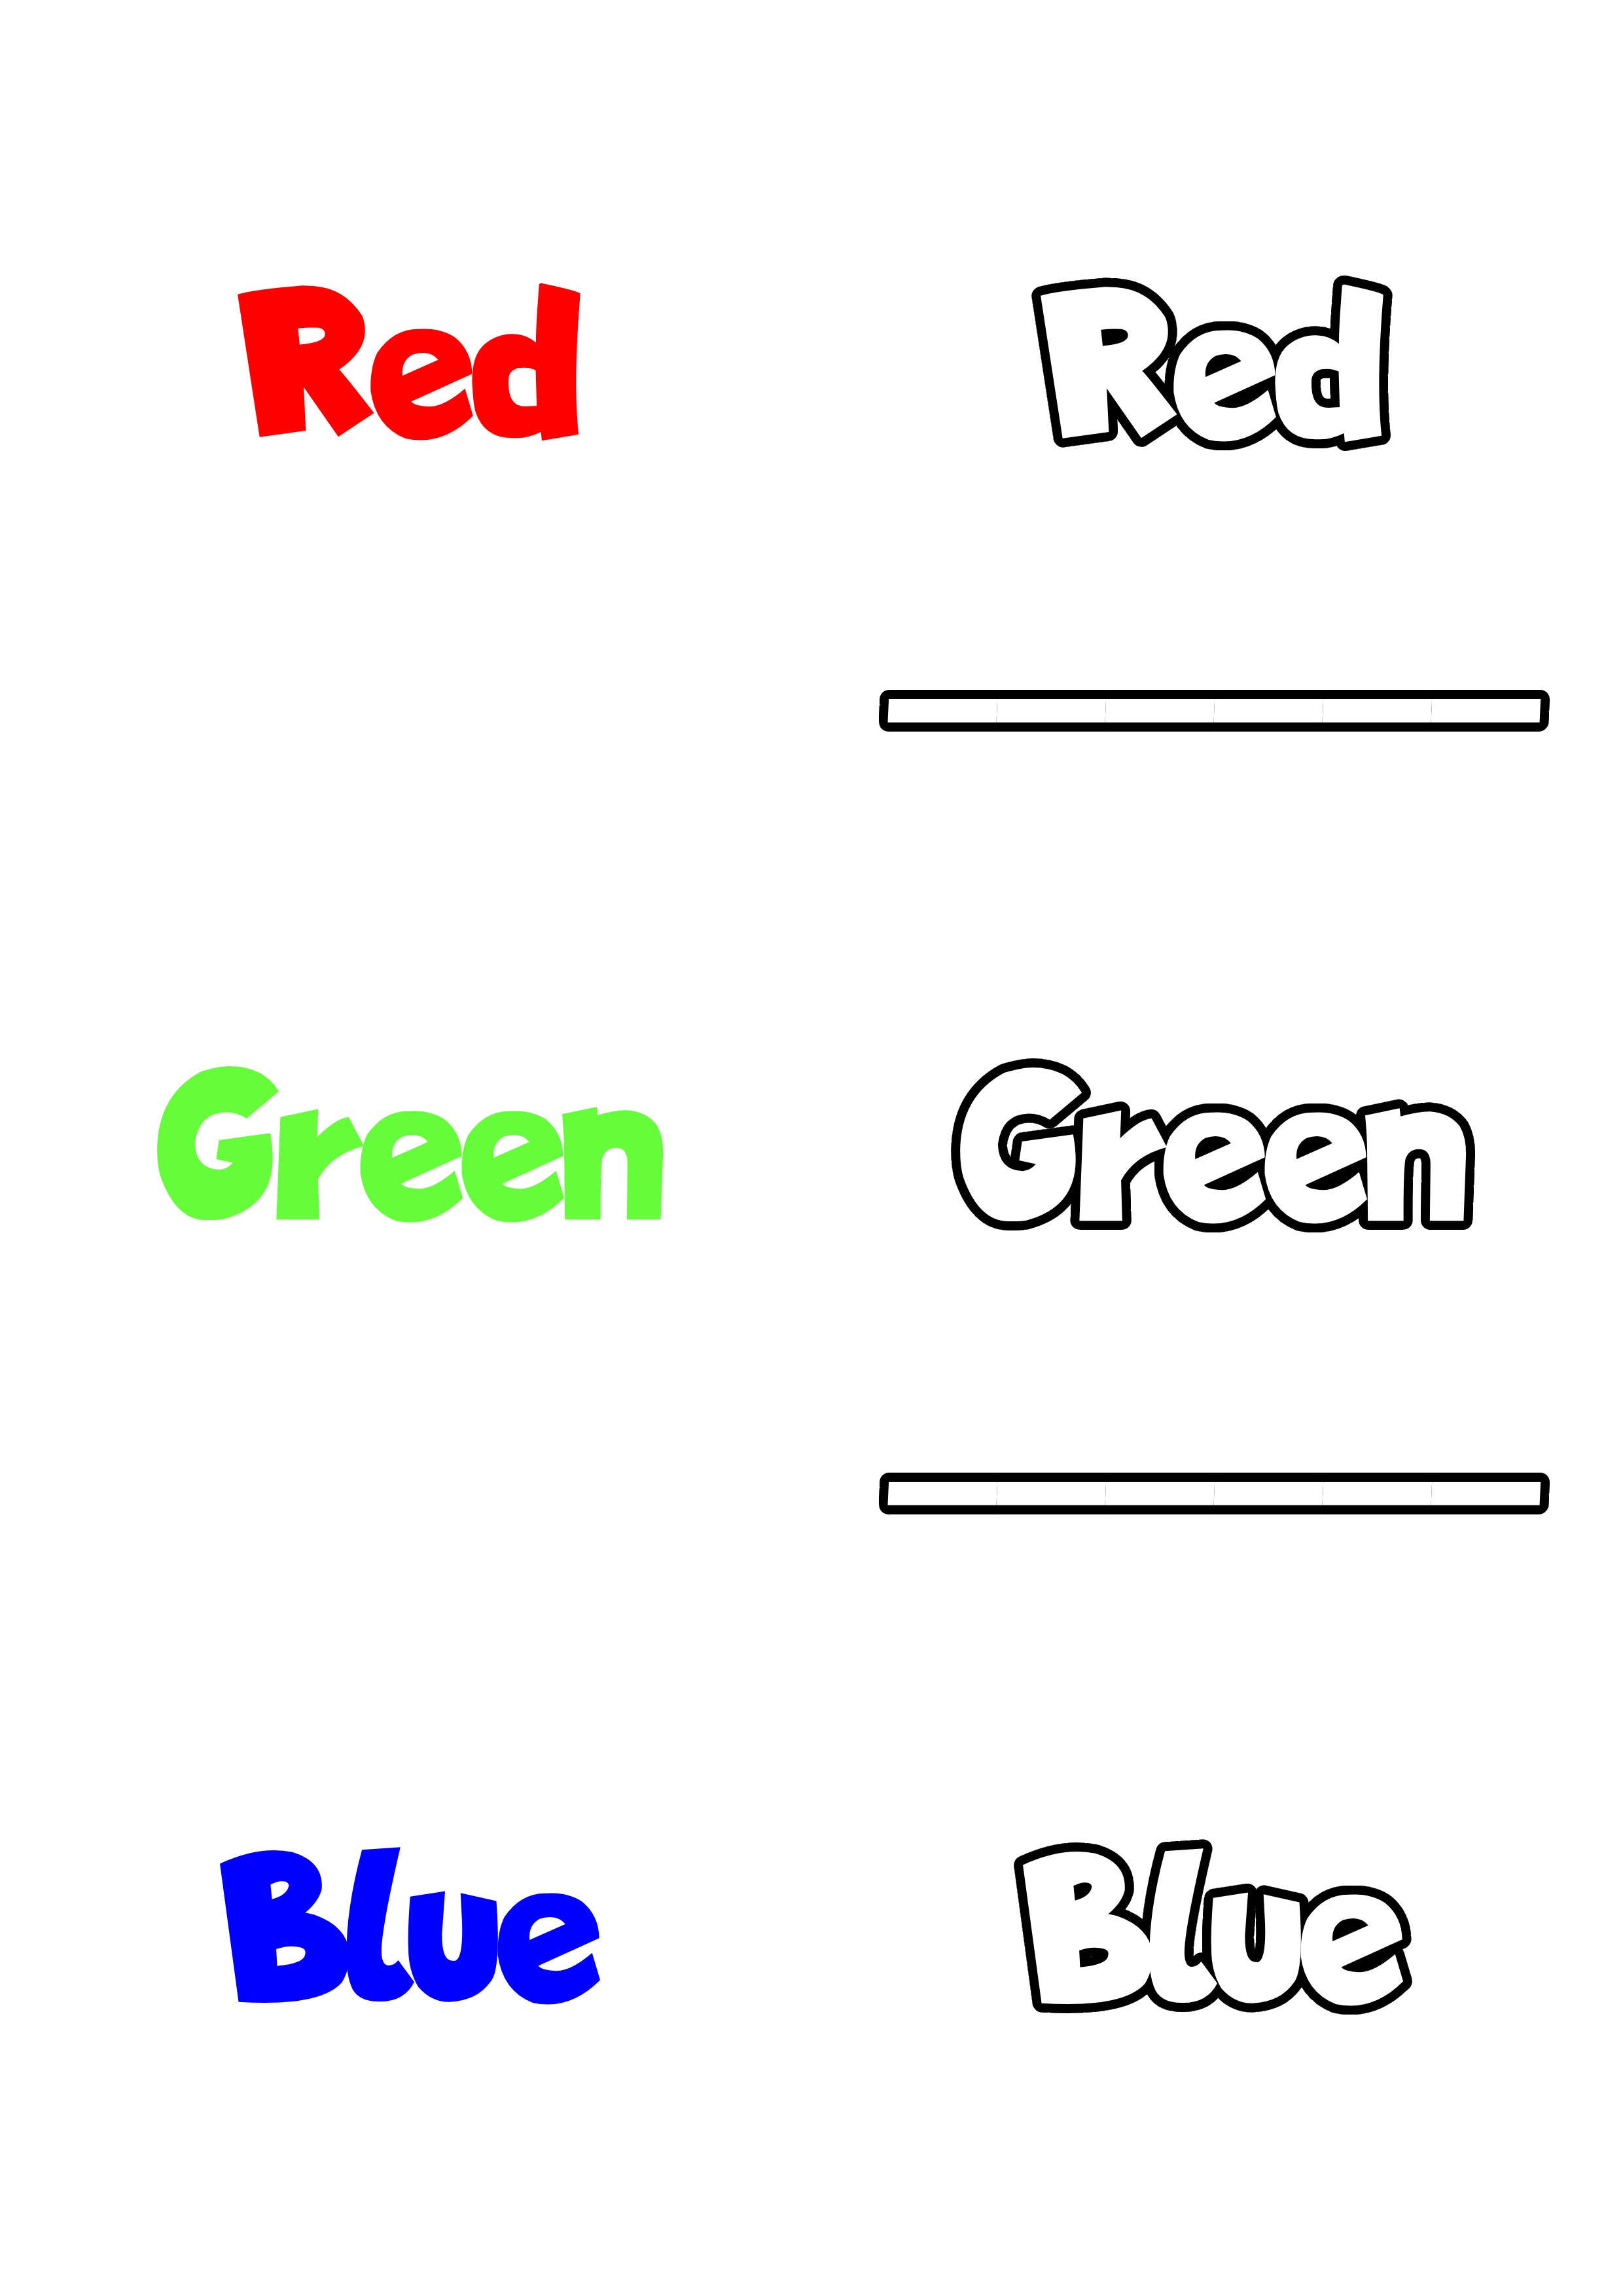 Learn Basic Colors for Kids, rgb colors